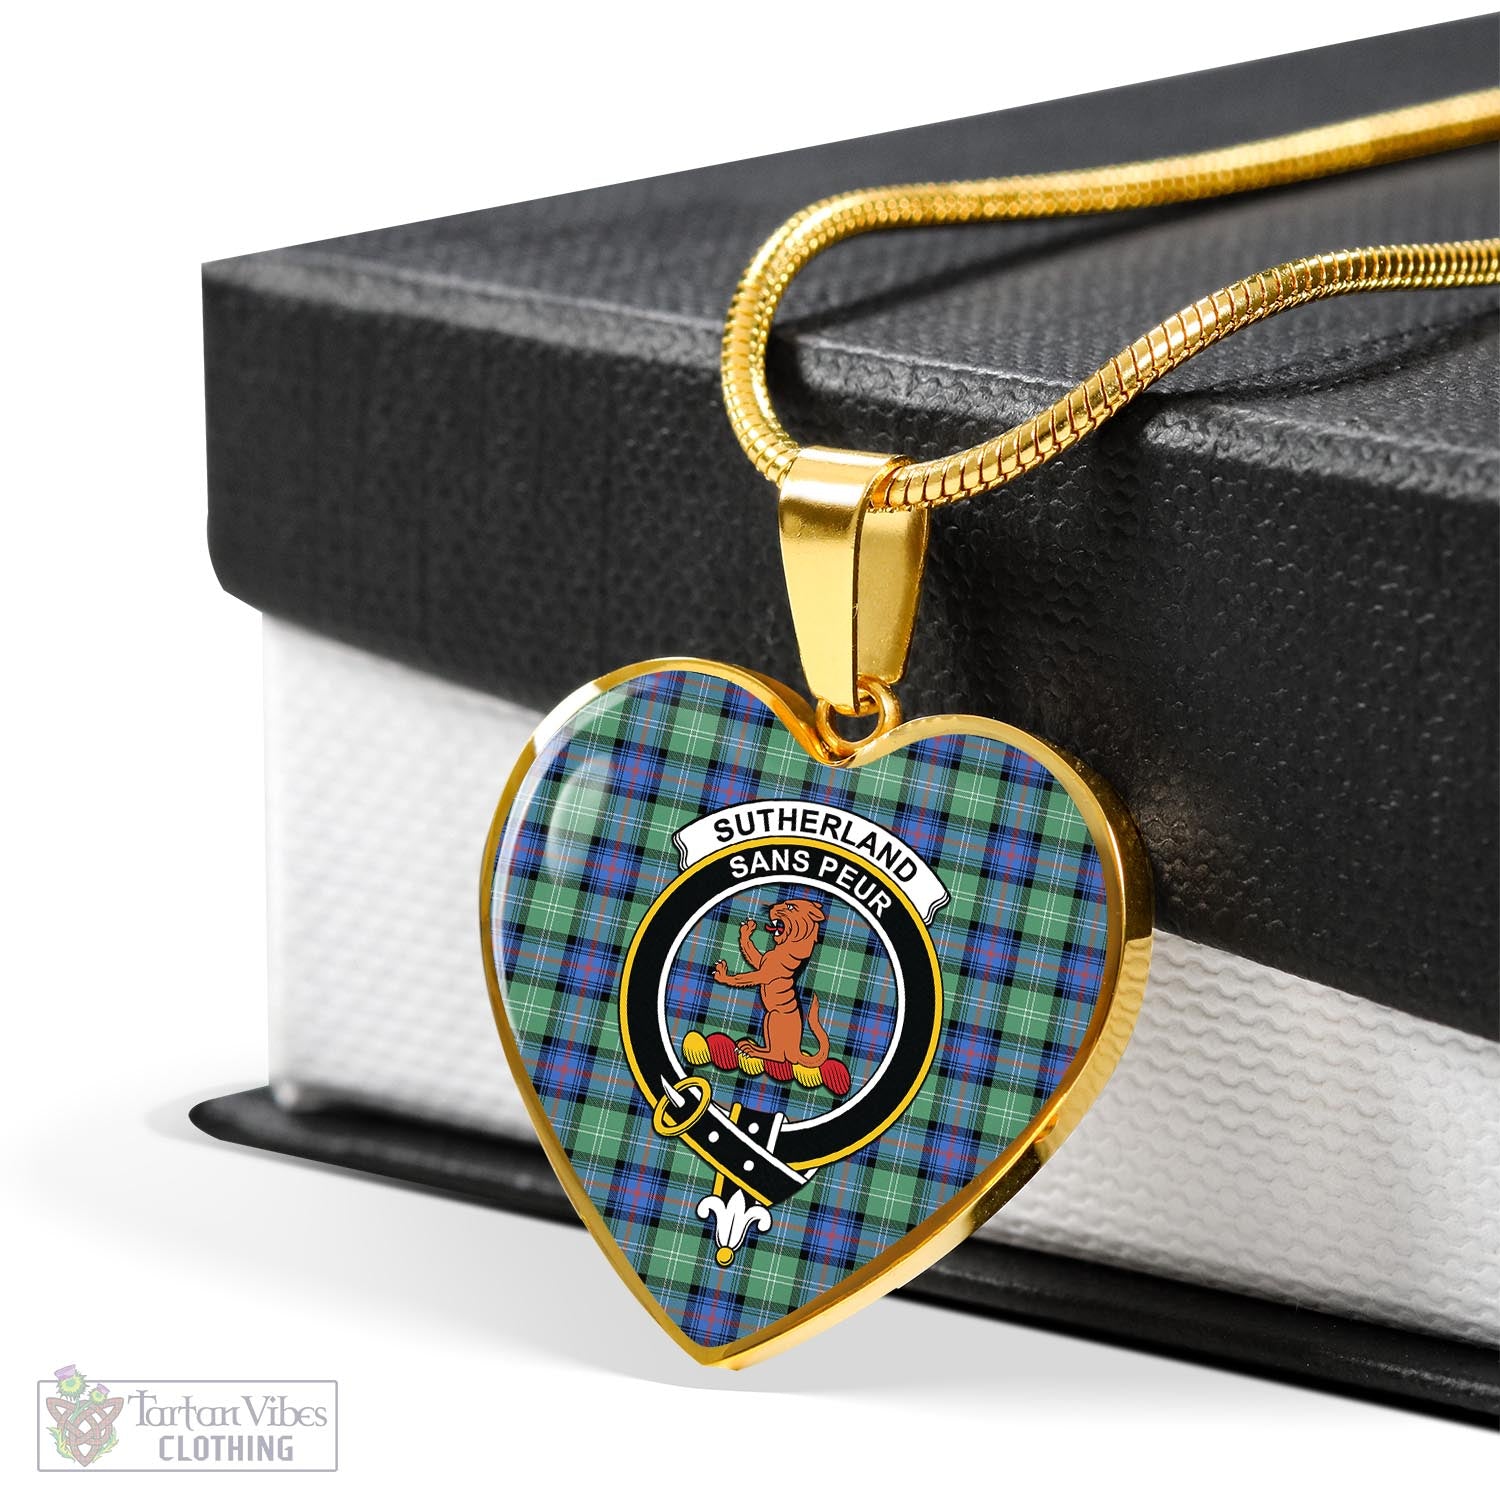 Tartan Vibes Clothing Sutherland Ancient Tartan Heart Necklace with Family Crest